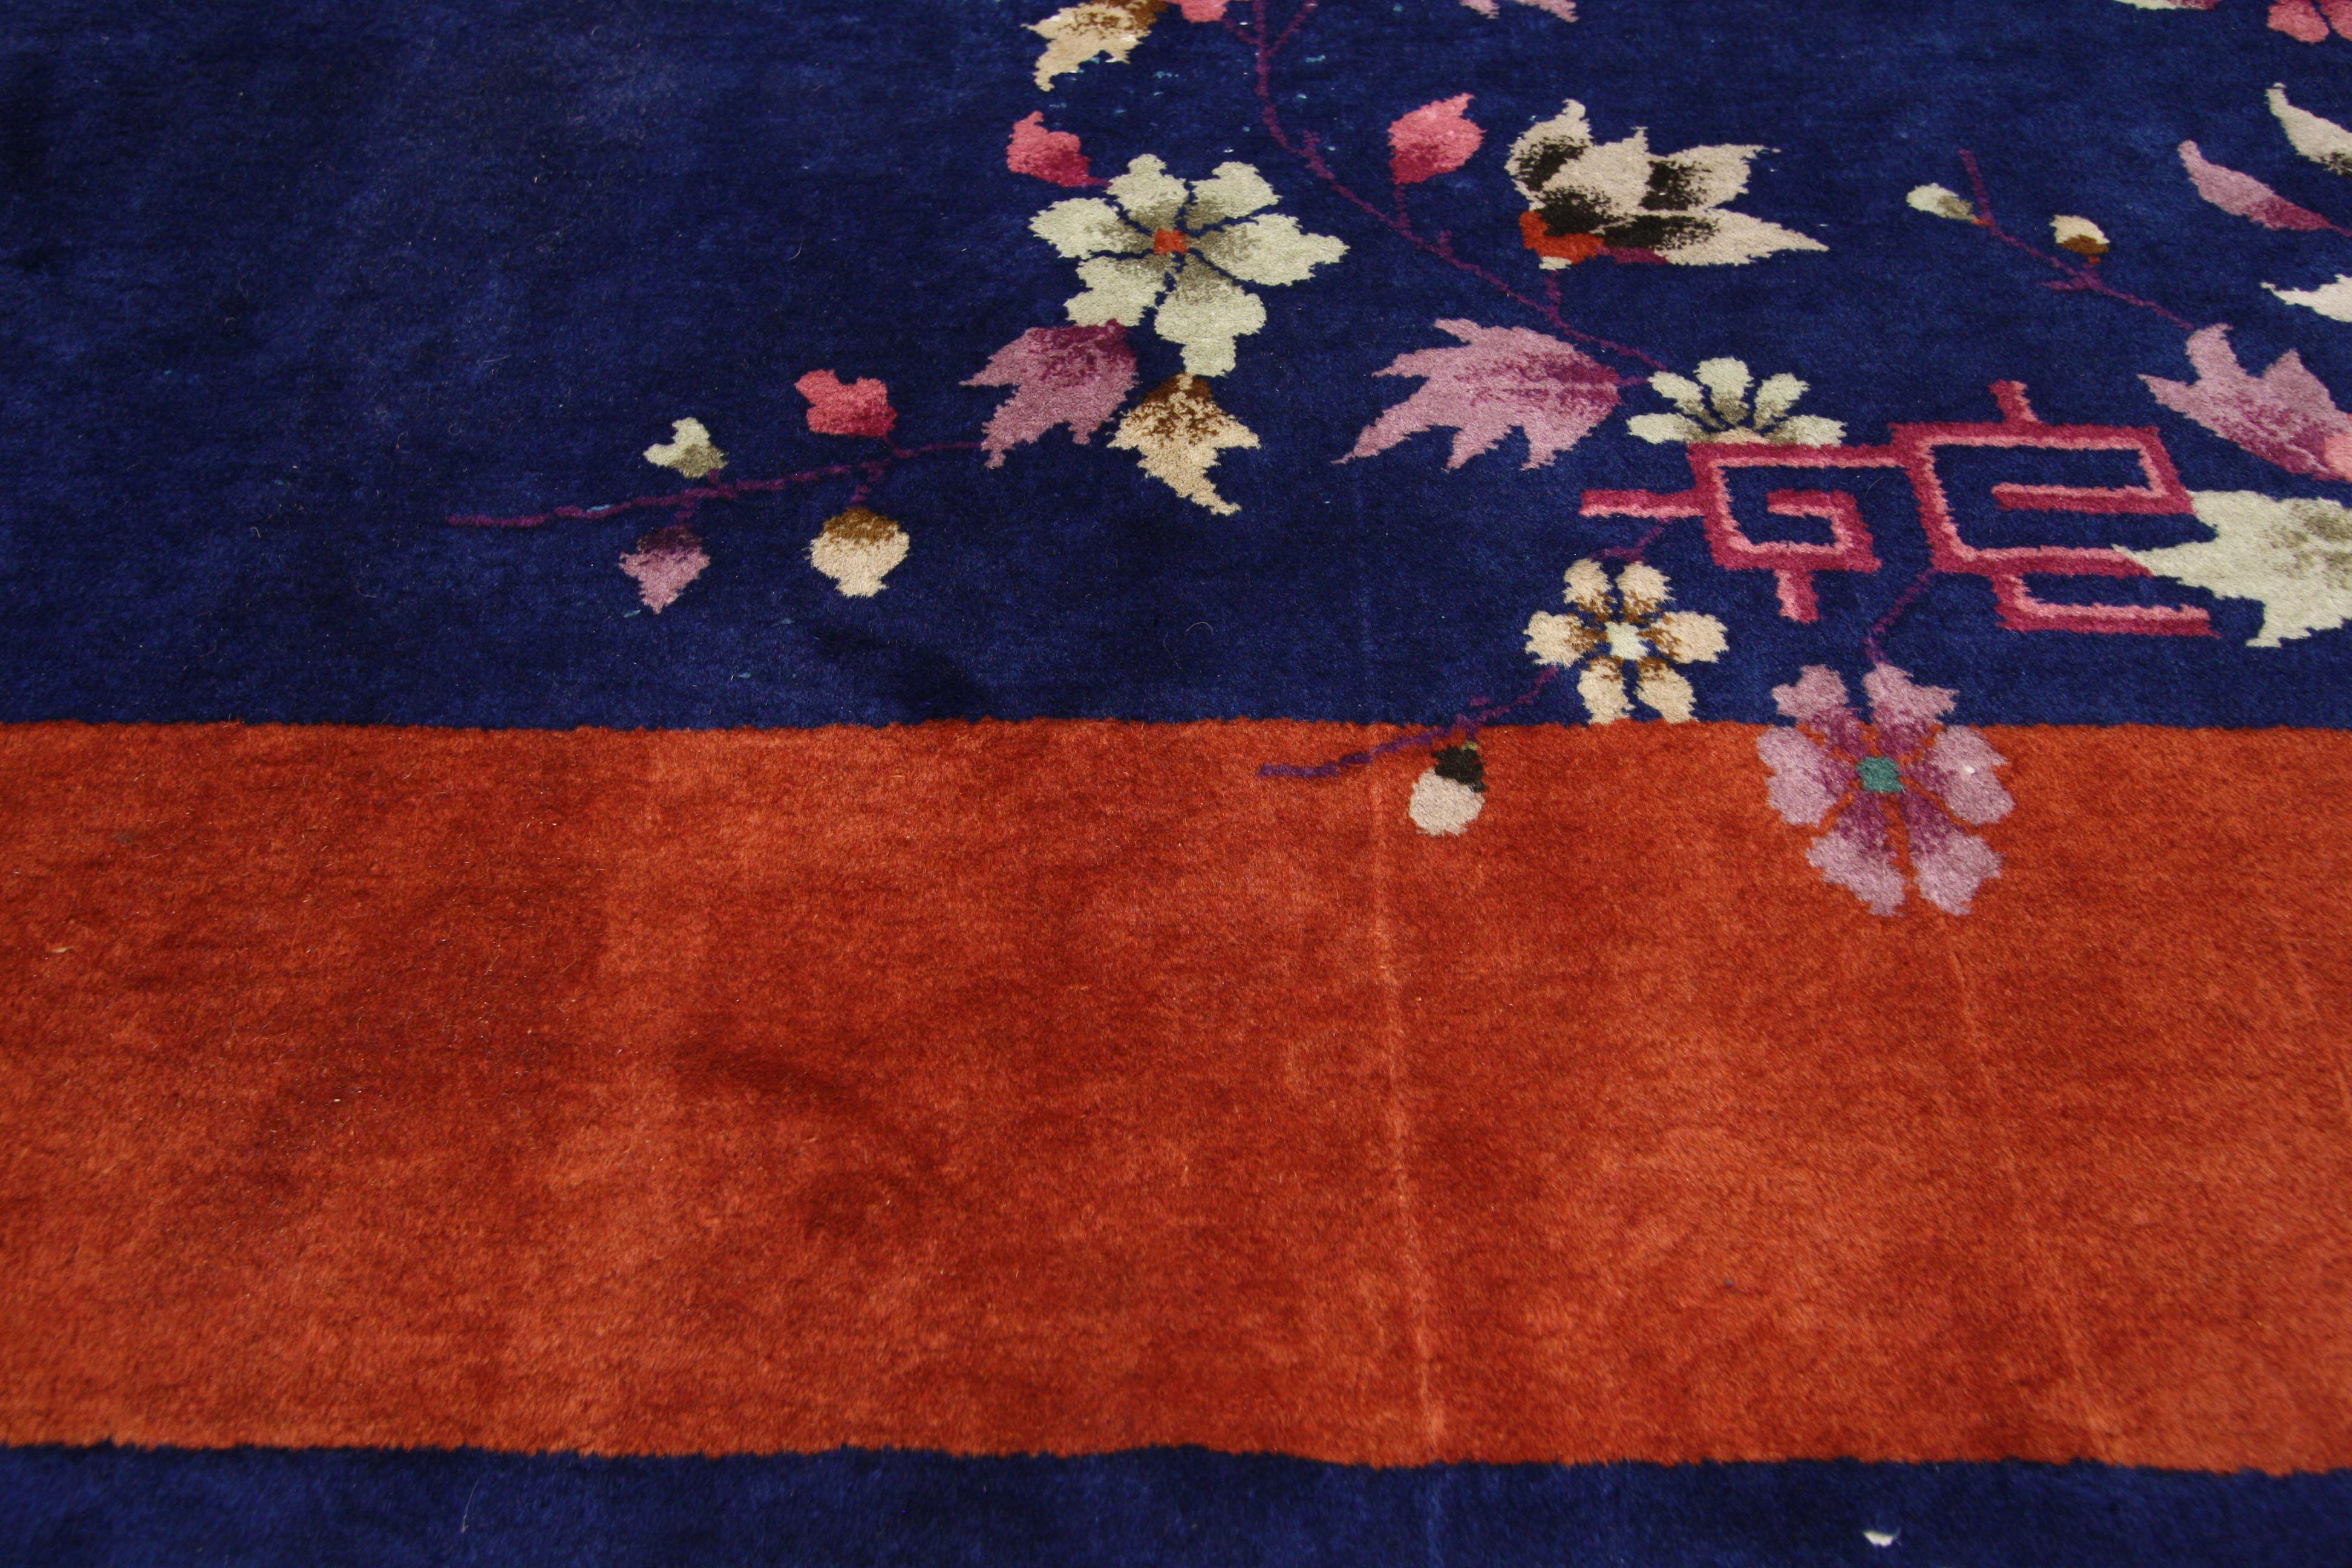 77177,Antique Chinese Art Deco Style Rug, Chinoiserie Chic Modern Asian Area Rug. This hand-knotted wool antique Chinese Art Deco style rug is a bright, dynamic chinoiserie chic rug with a deep blue field and terra cotta border broken by multicolor